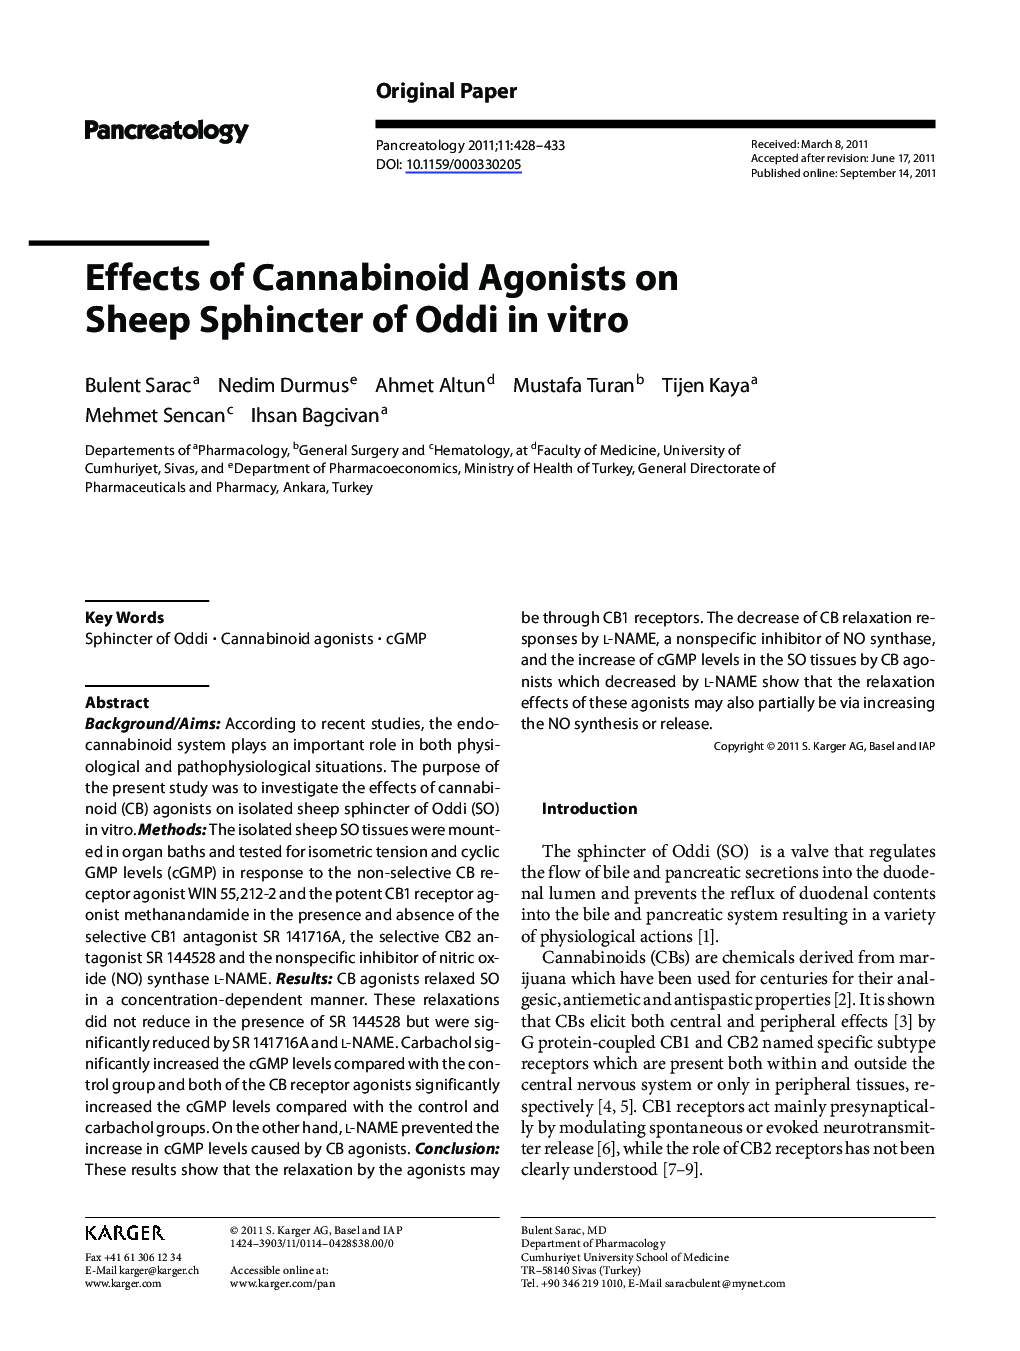 Effects of Cannabinoid Agonists on Sheep Sphincter of Oddi in vitro